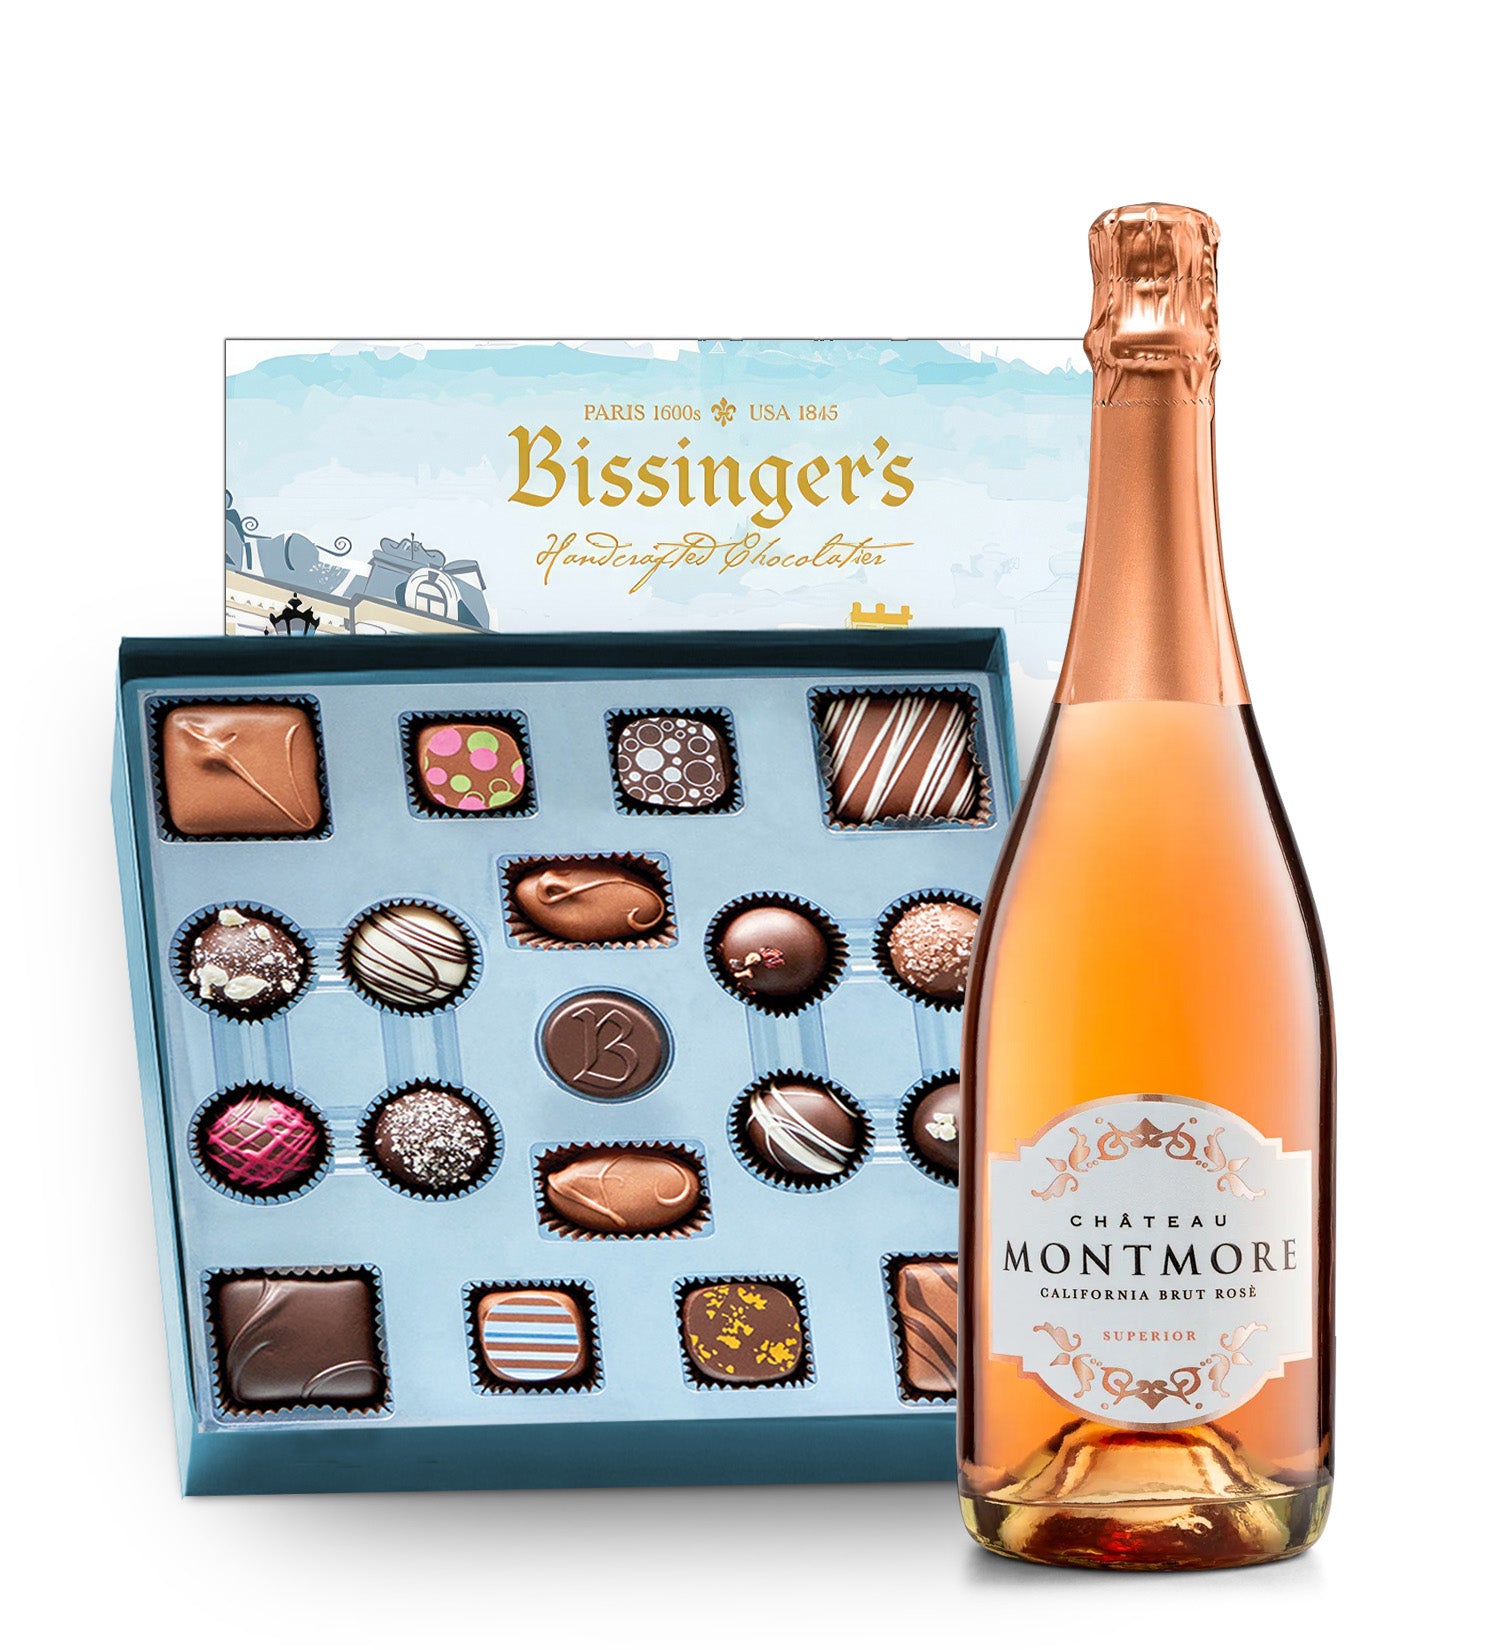 Chateau Montmore Sparkling Rosé & Bissinger's French Connection Chocolates